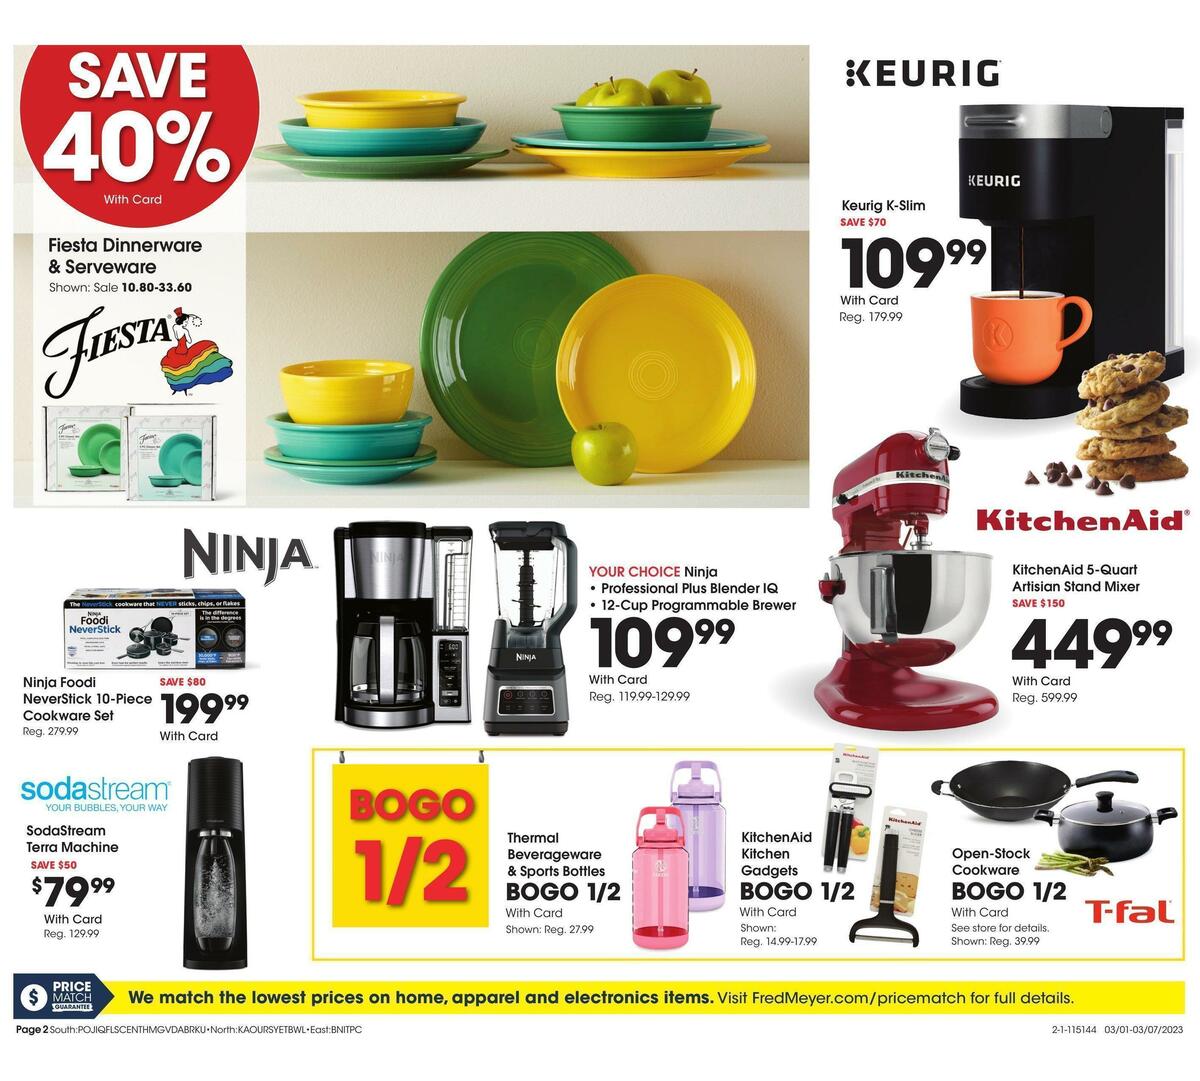 Fred Meyer General Merchandise Weekly Ad from March 1